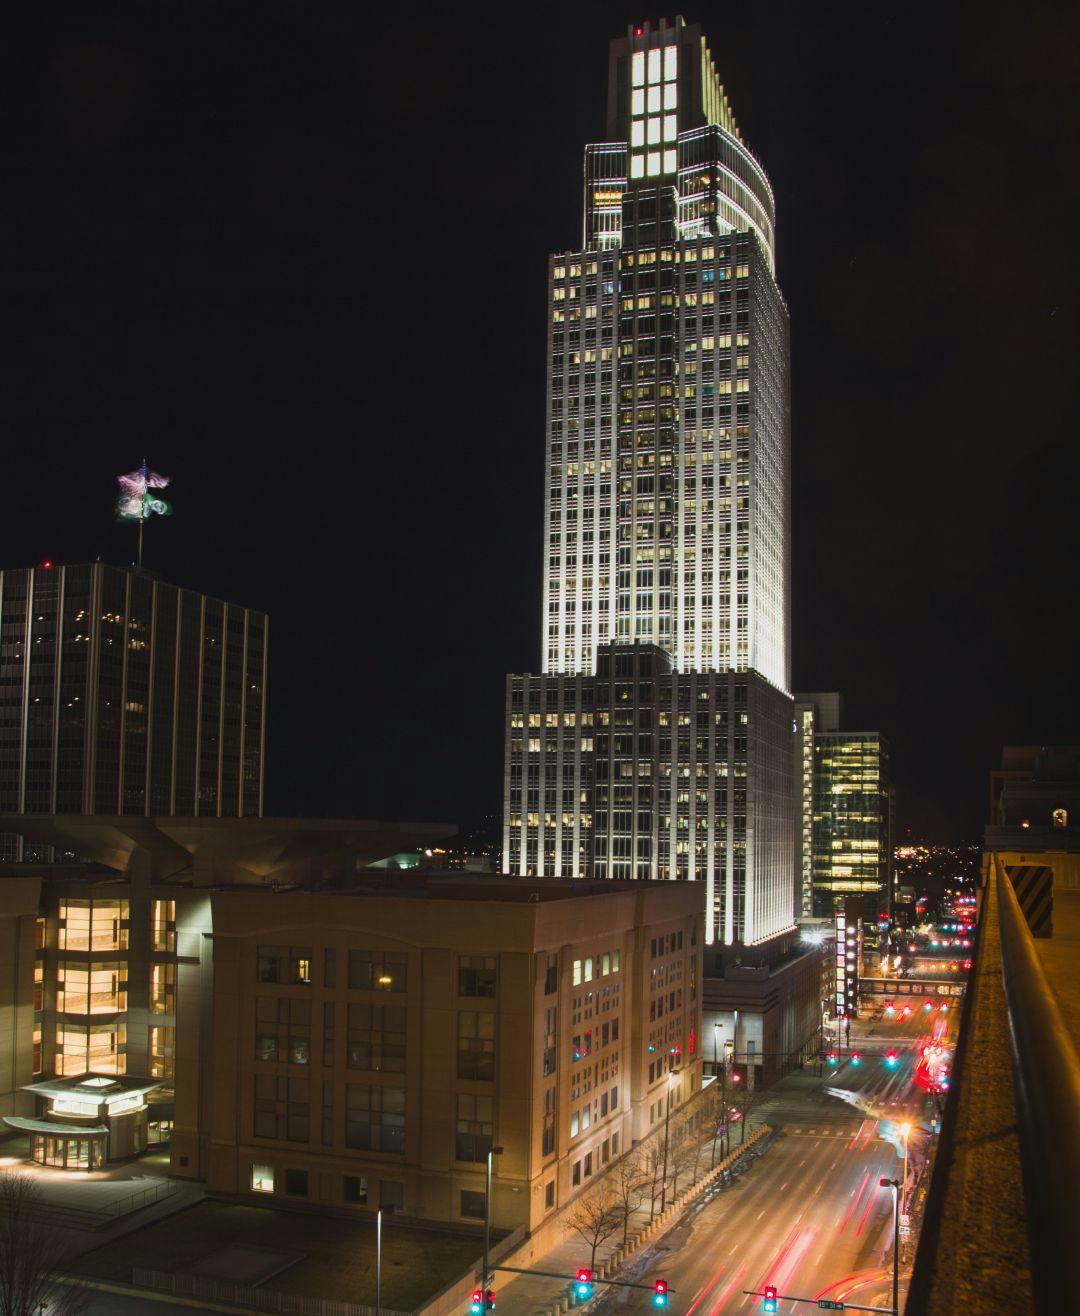 A timelapse image of downtown Omaha